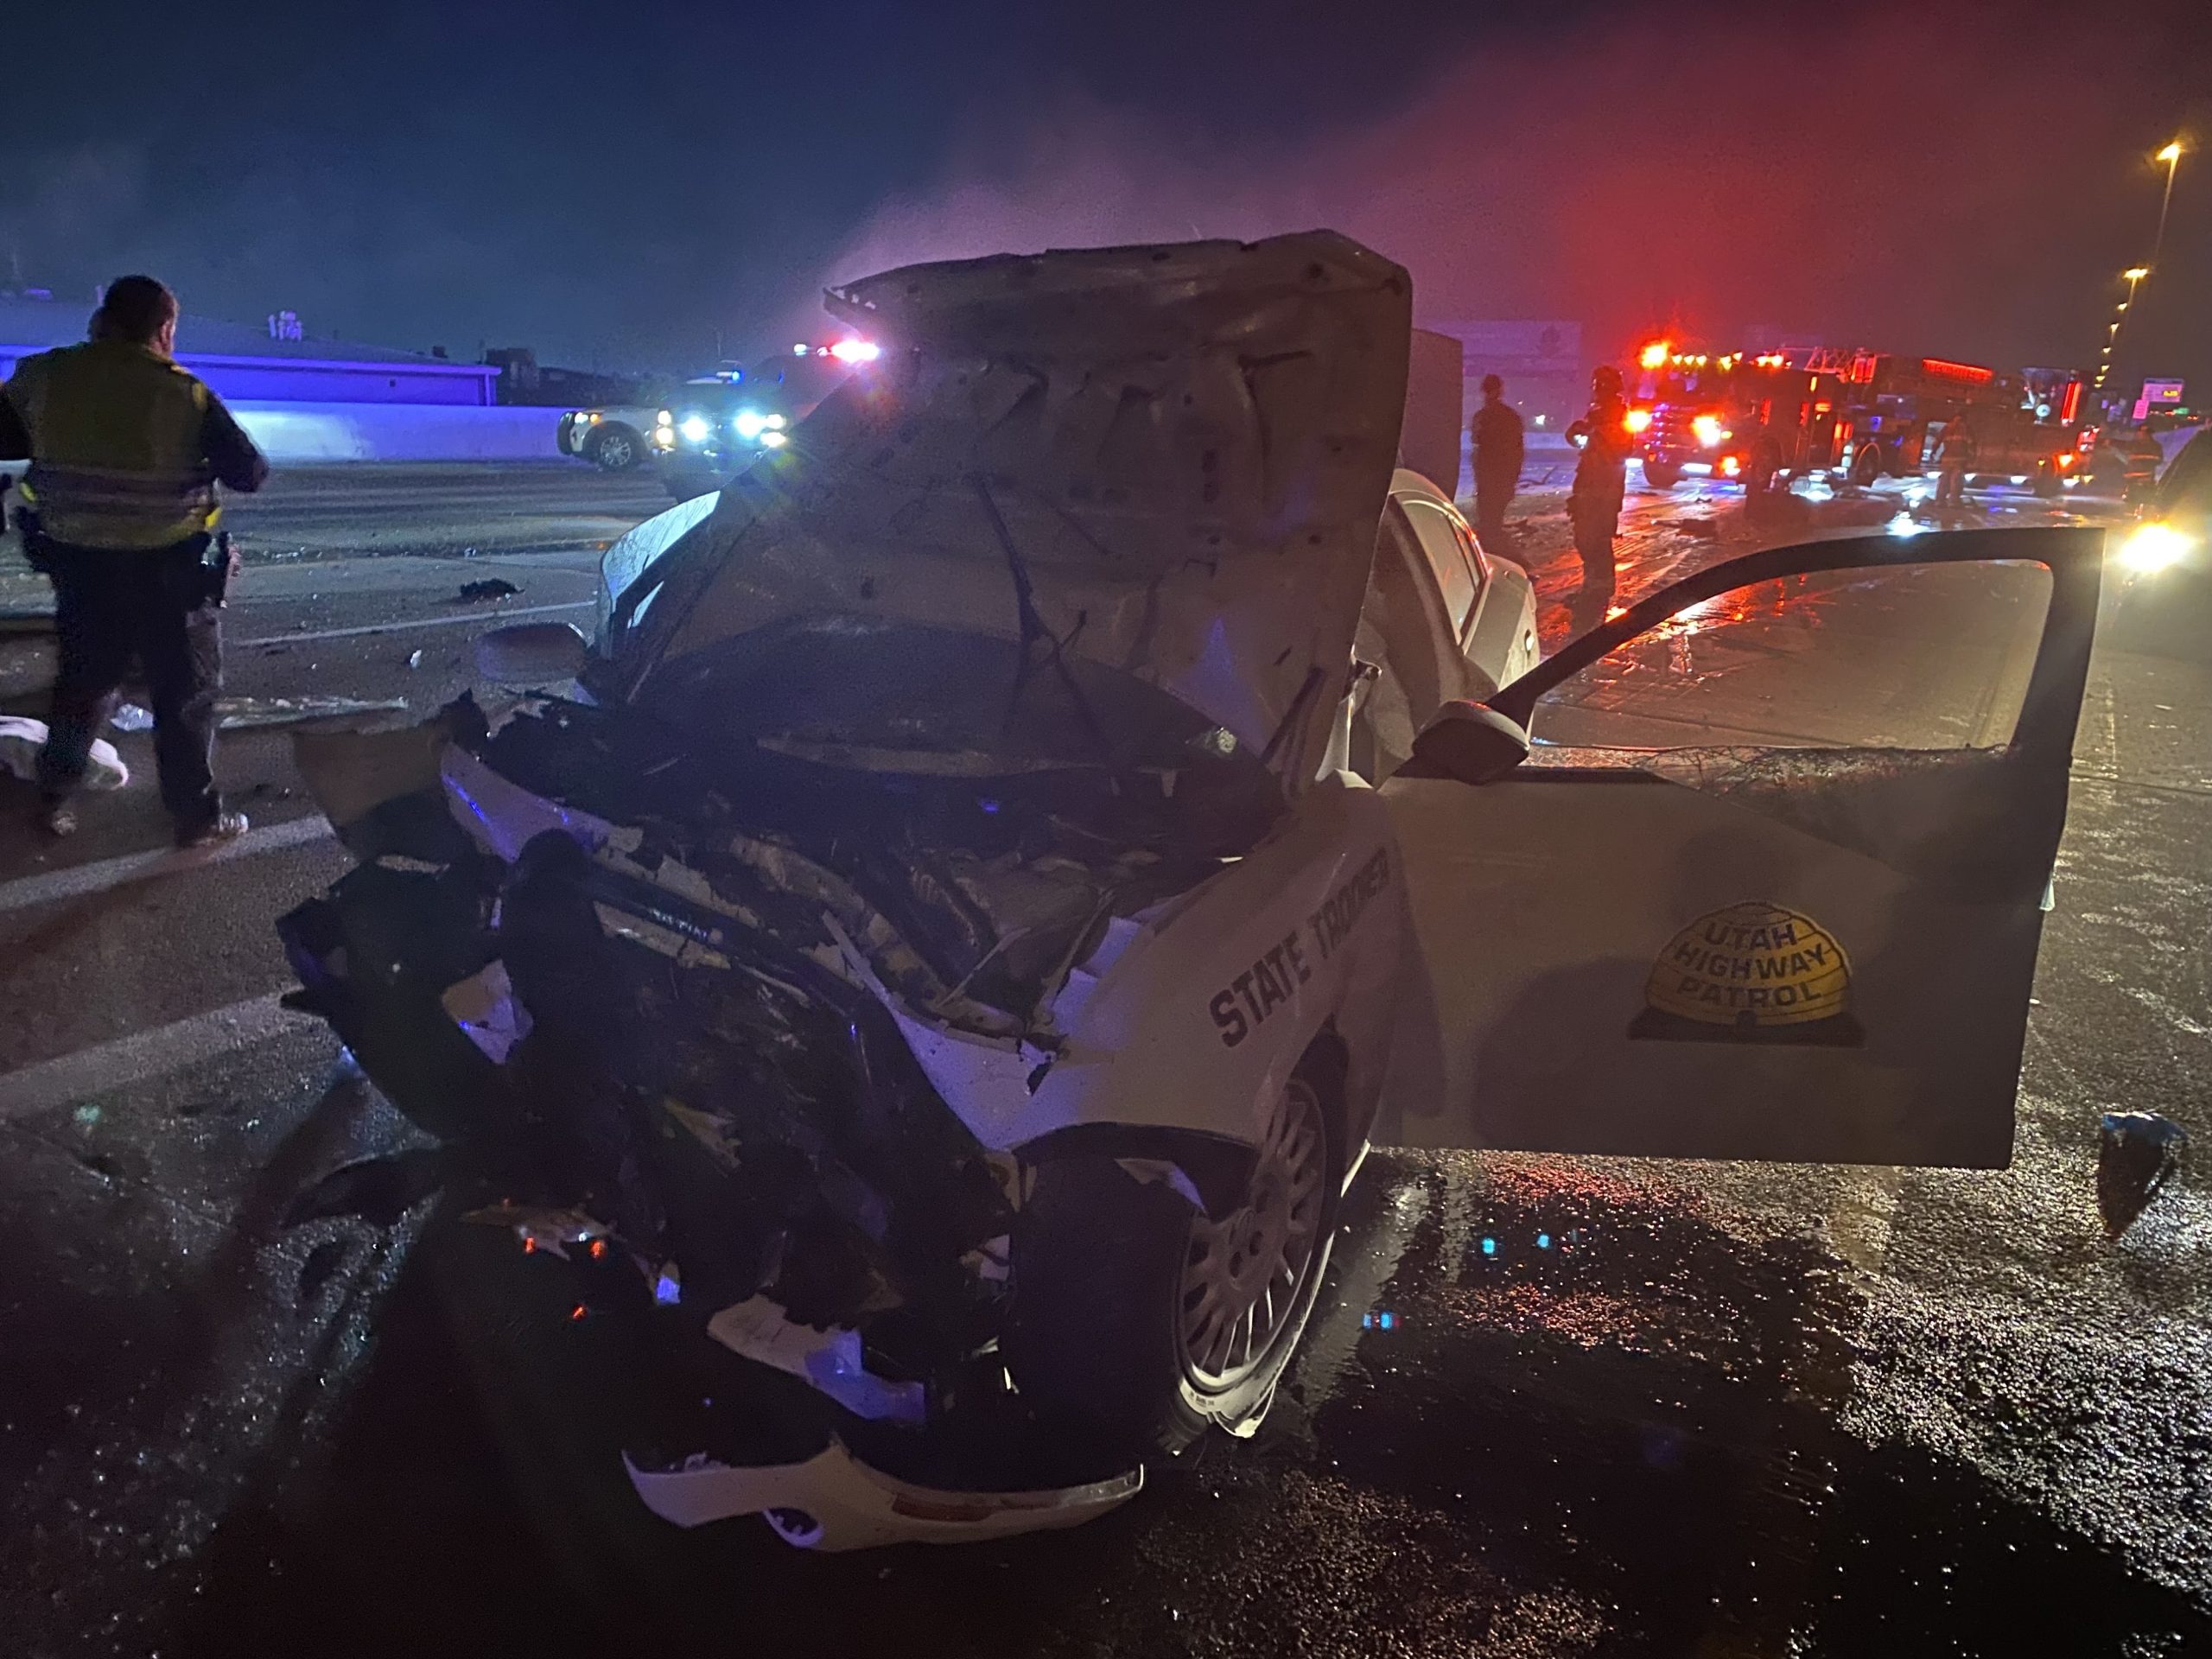 Witnesses say woman driving wrong-way on I-40 intentionally caused crash